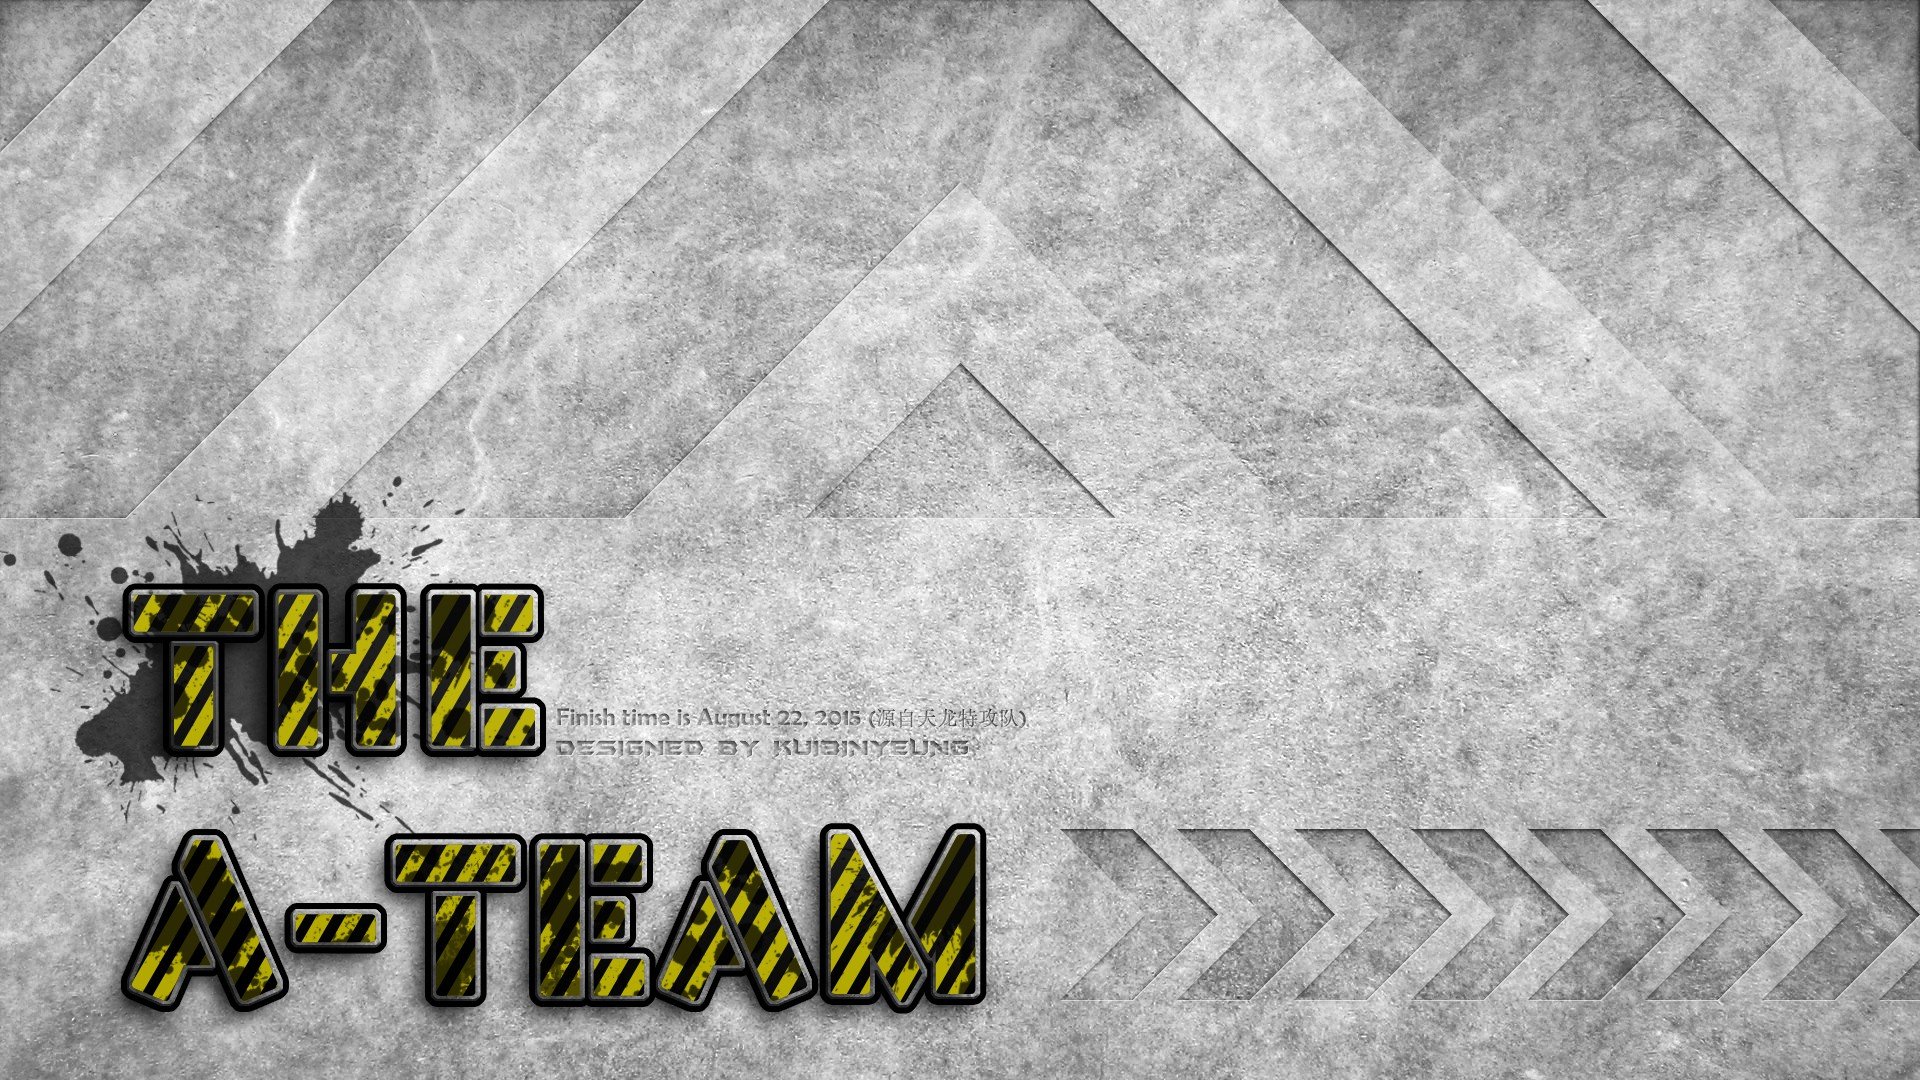 The A Team, Adobe Photoshop, Industrial Wallpaper